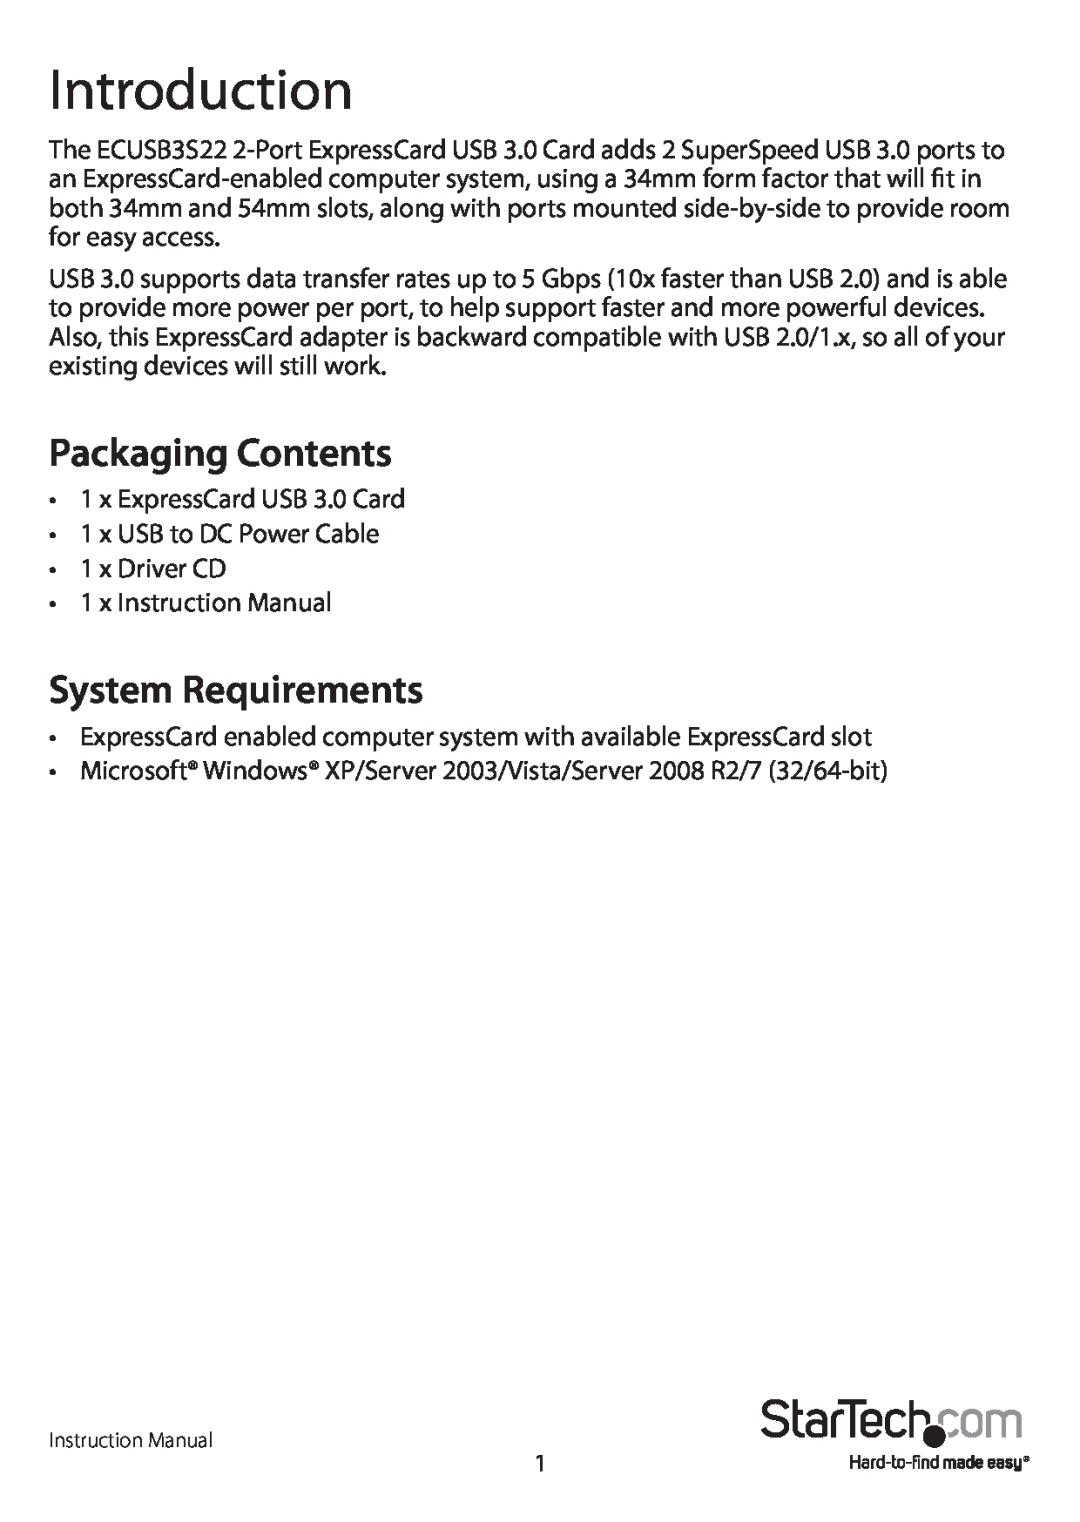 StarTech.com ecusb3s22 manual Introduction, Packaging Contents, System Requirements 